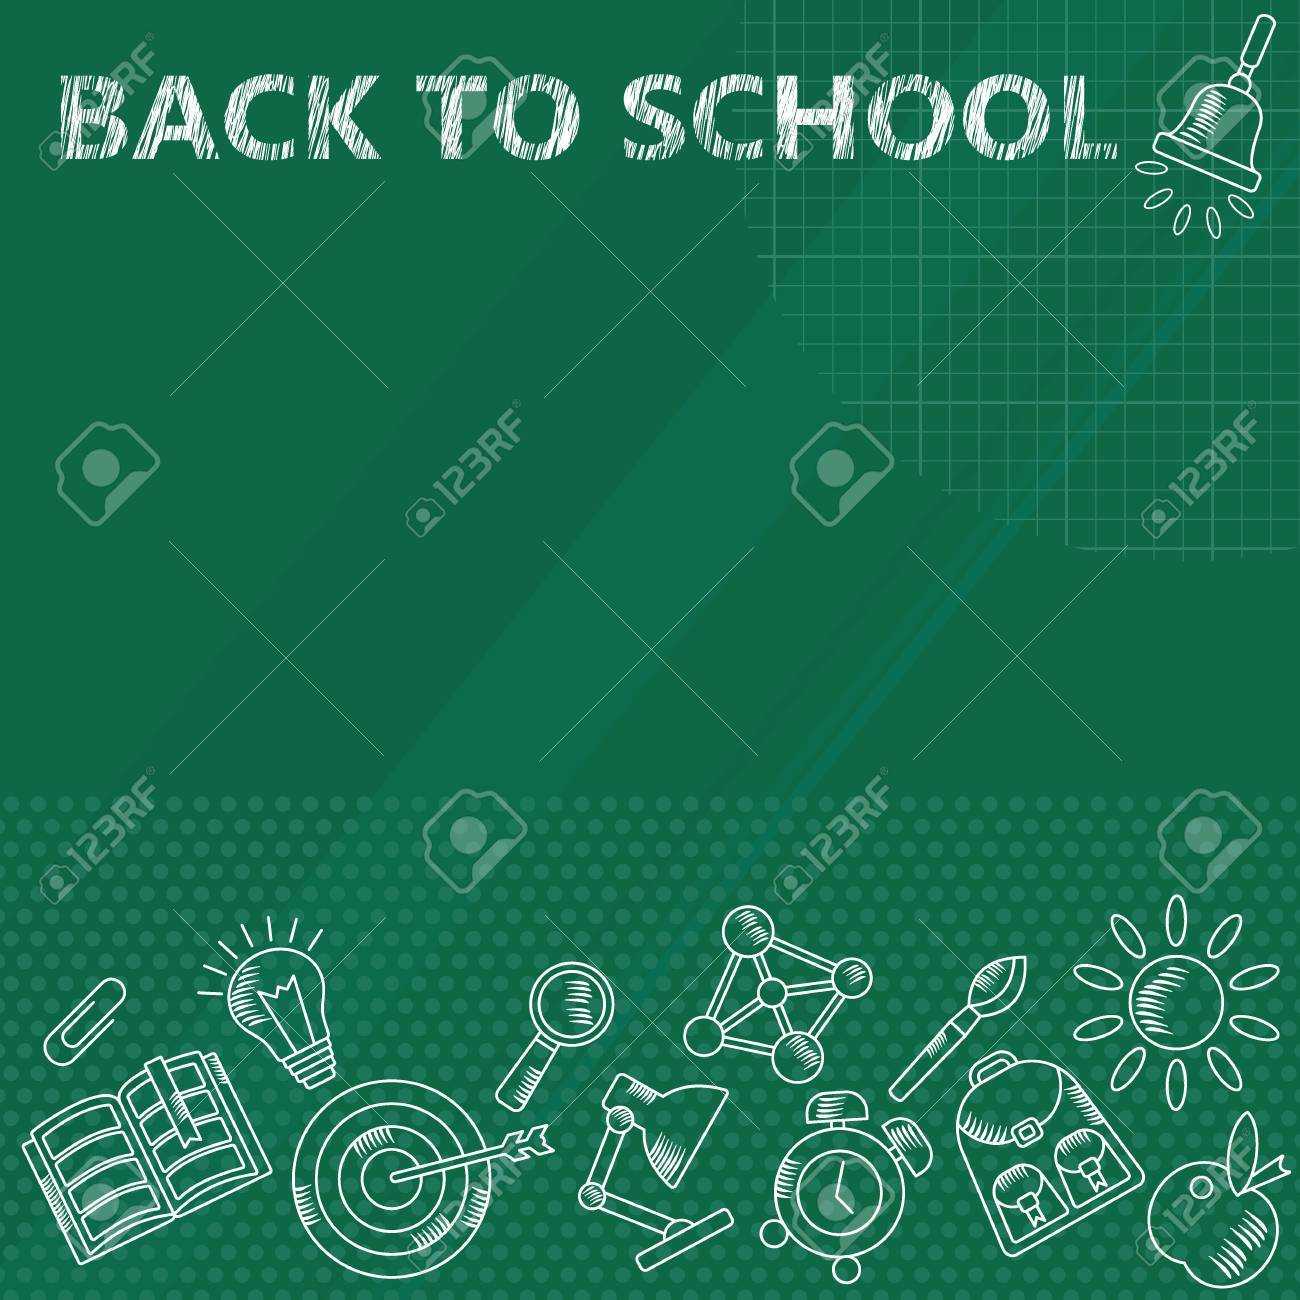 Back To School. Whiteboard In Classroom Poster And Banner Template.. Intended For Classroom Banner Template